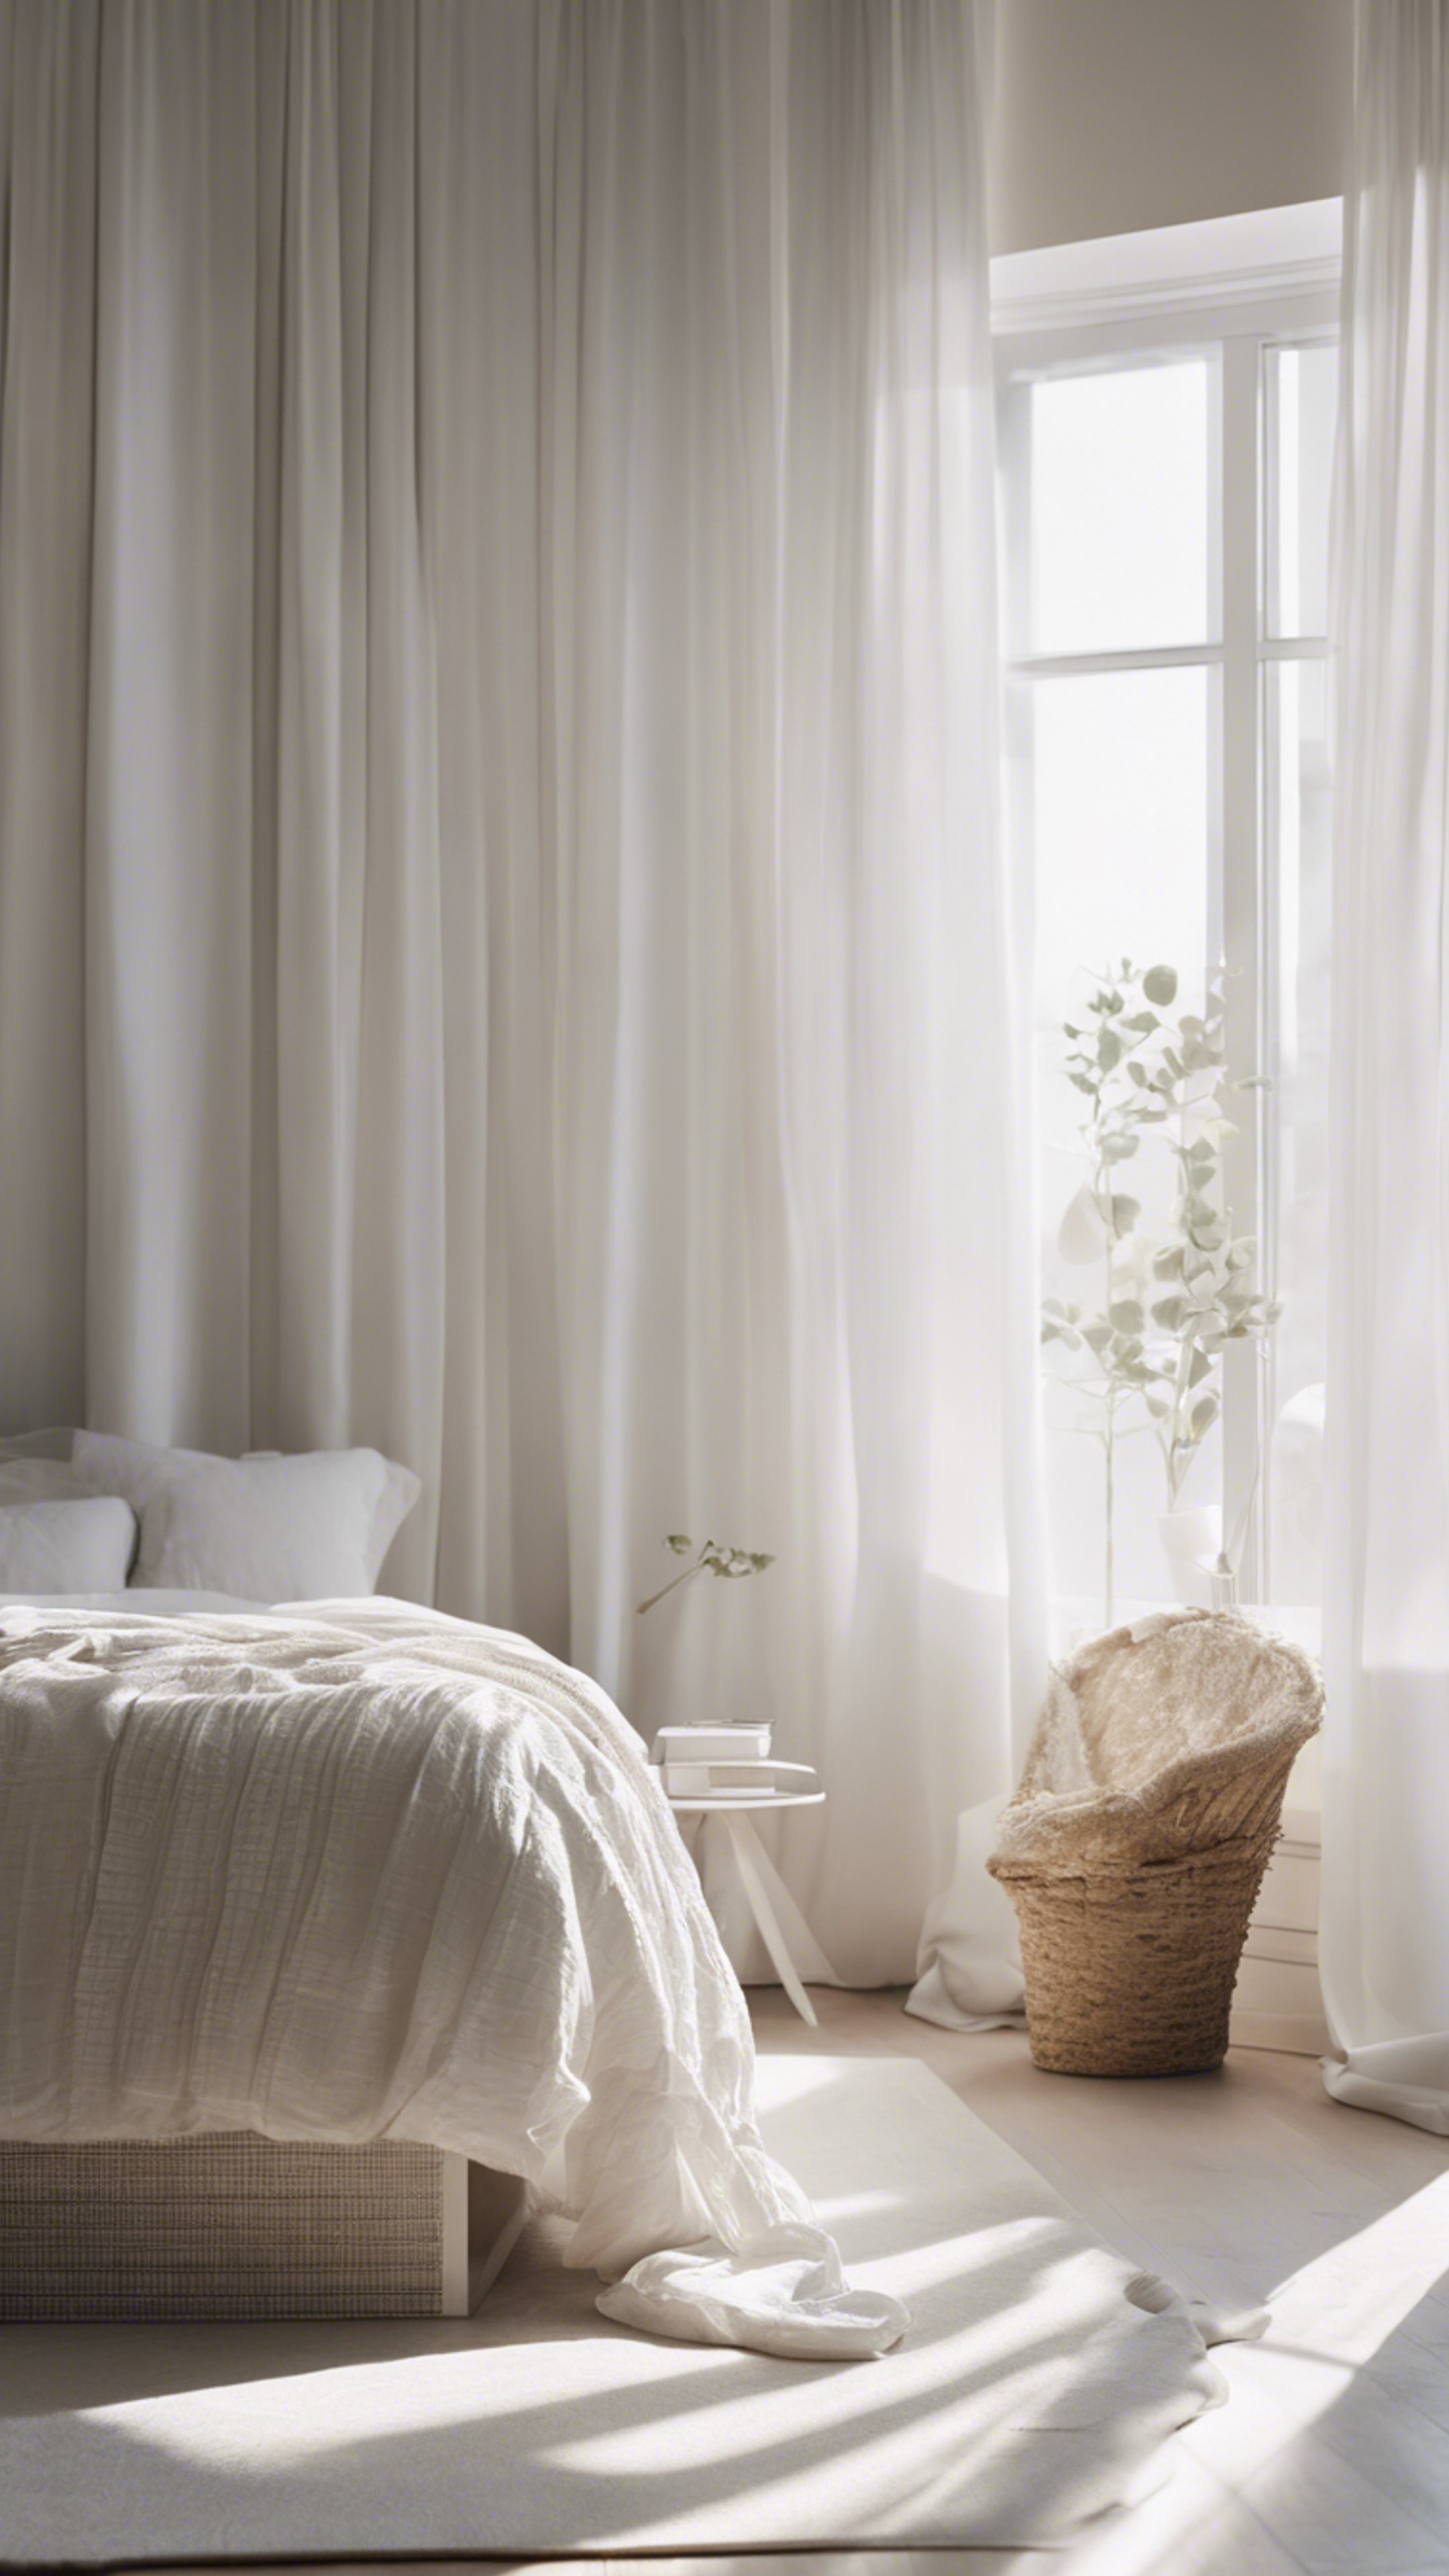 A serene white bedroom with a minimalist aesthetic, sunlight streaming through sheer curtains วอลล์เปเปอร์[e50a9fa27884450ea562]